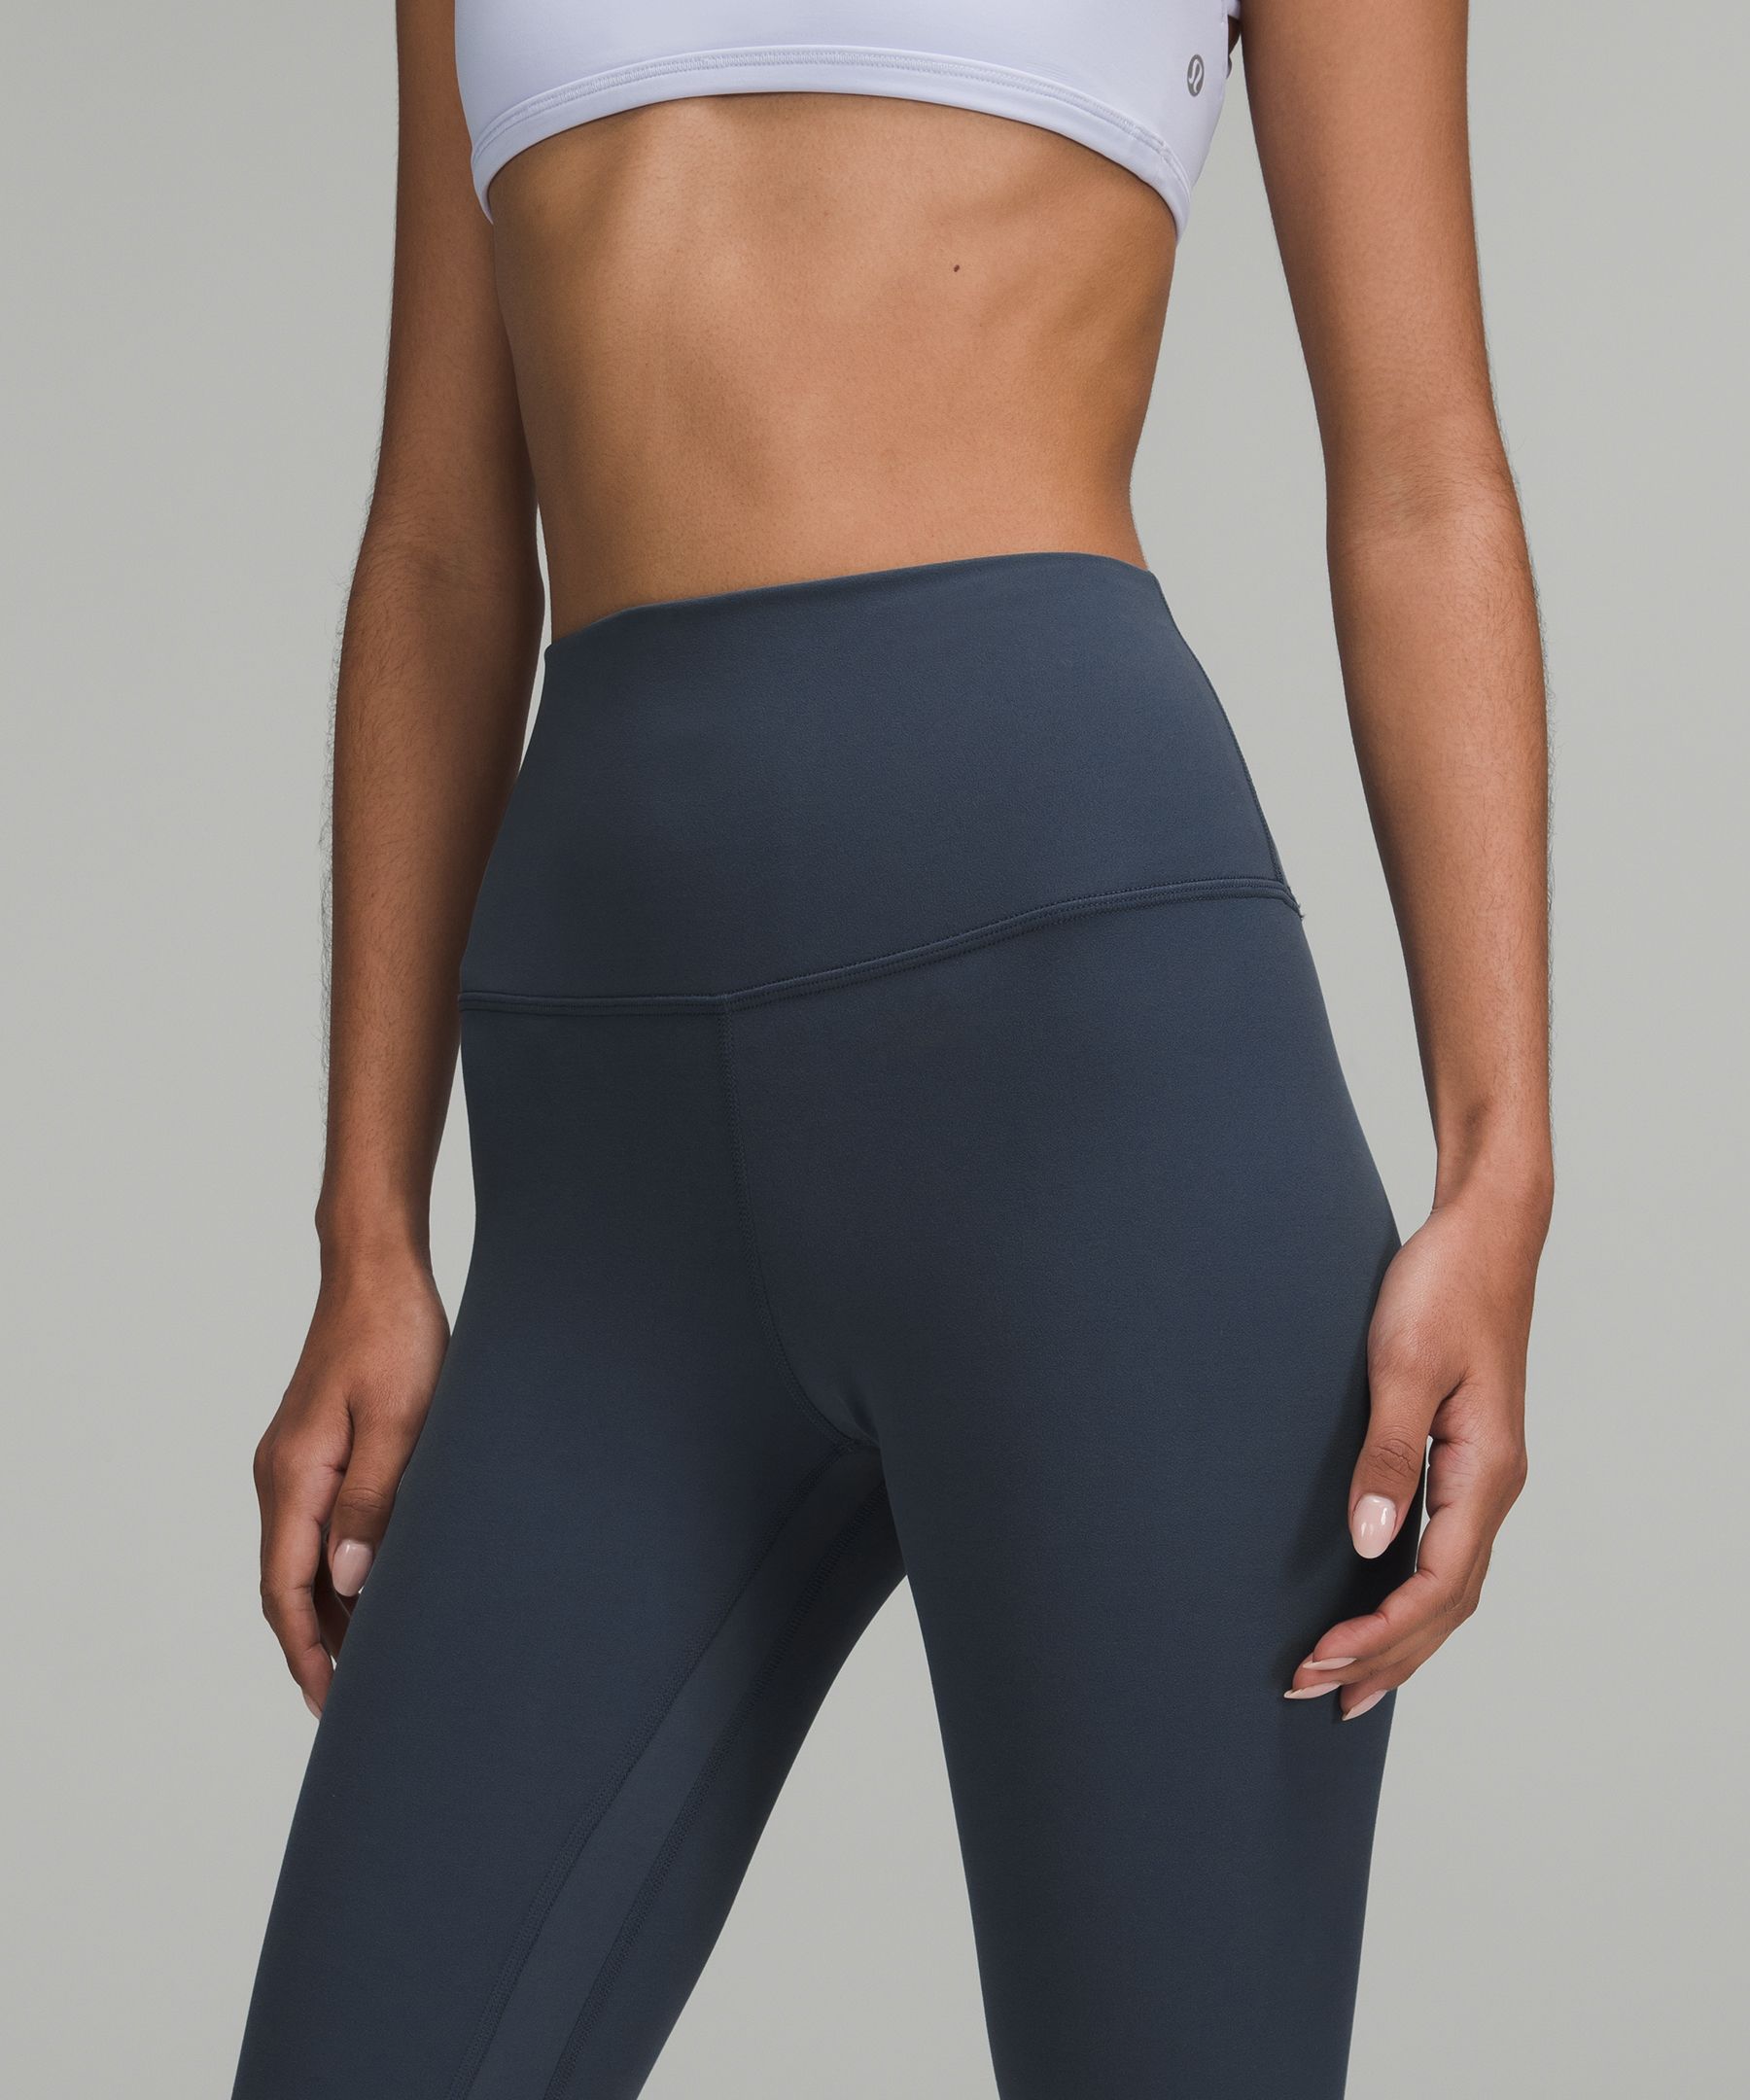 Yoga Lu Leggings: Womens Cropped Outfits For Fitness, Exercise, And Running  Slim Fit Align Pants From Linhome99, $6.57